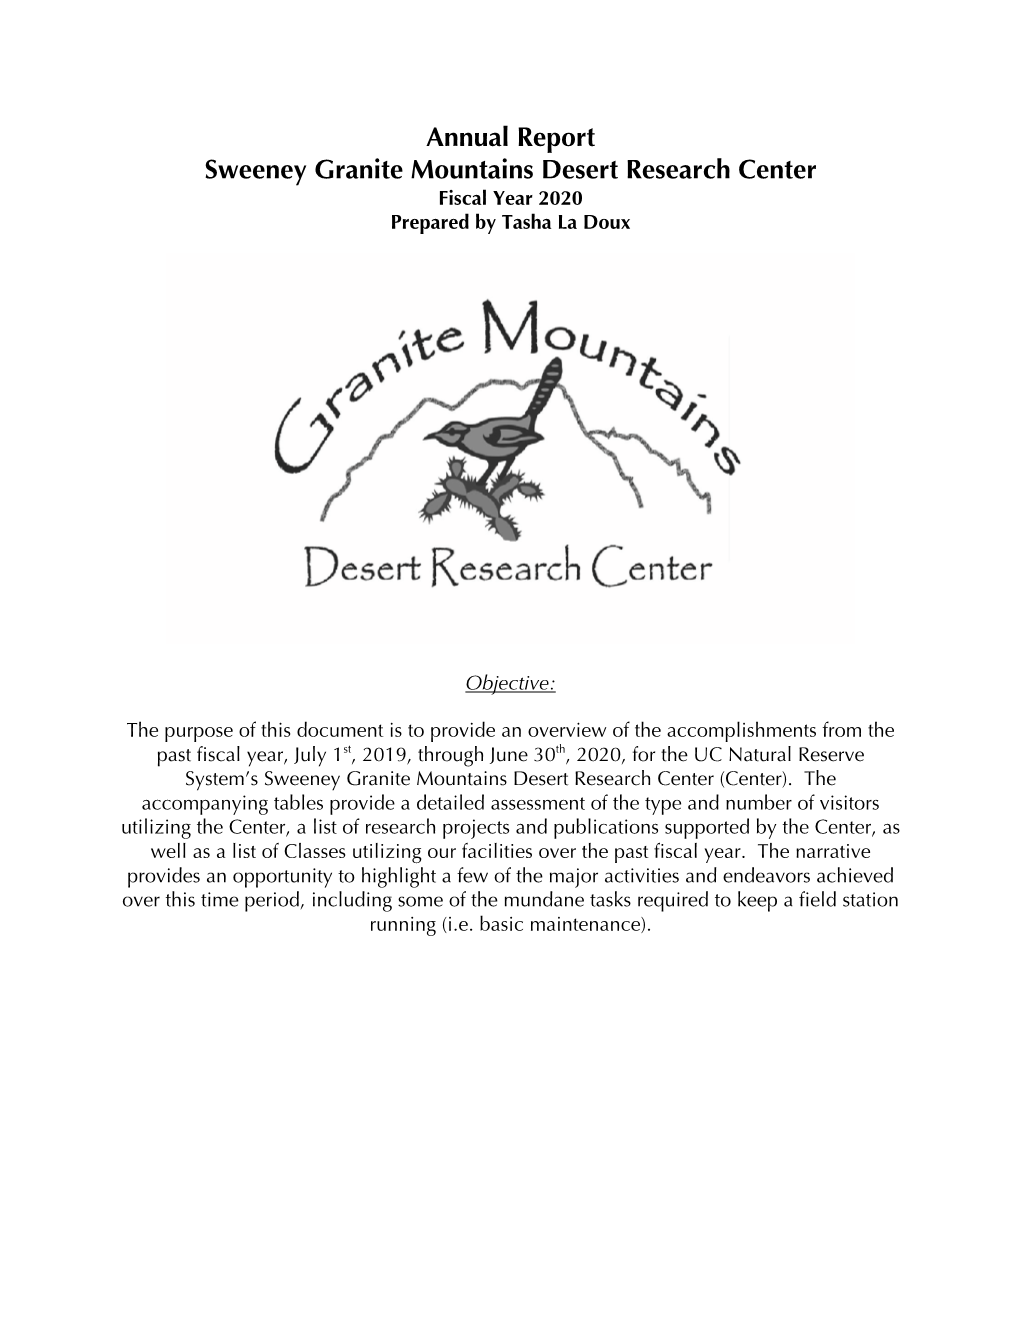 Annual Report Sweeney Granite Mountains Desert Research Center Fiscal Year 2020 Prepared by Tasha La Doux